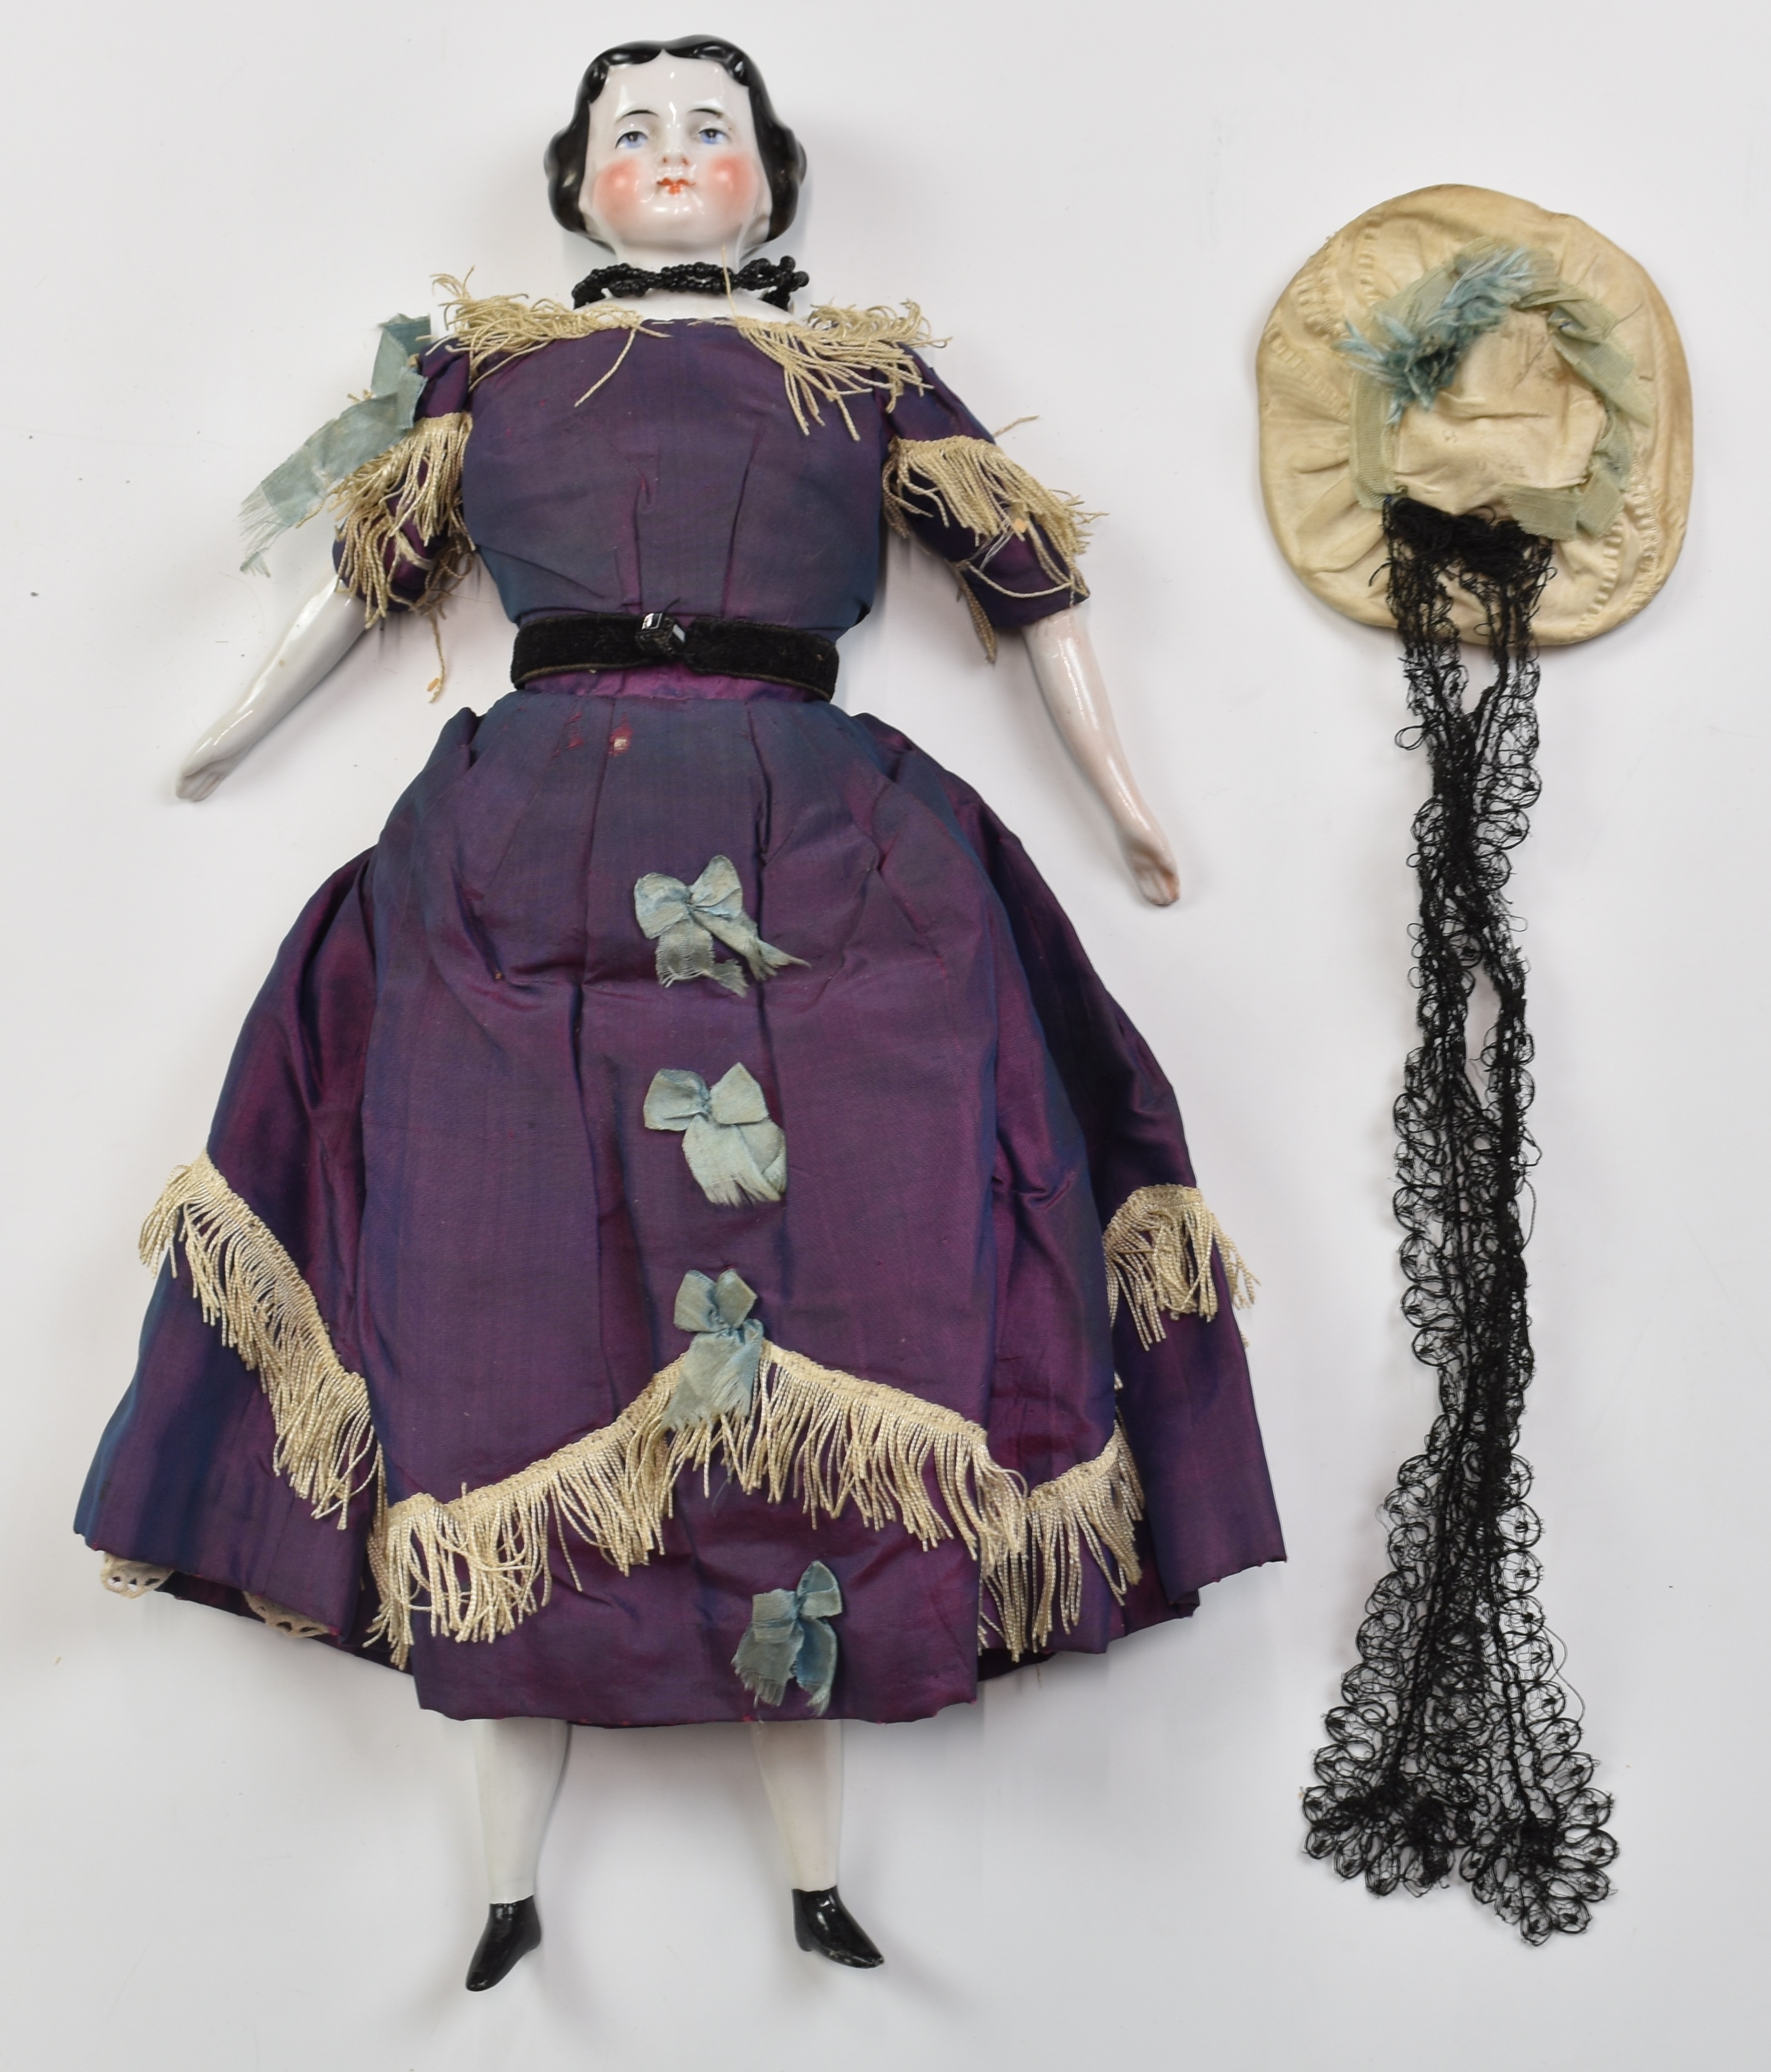 19th / early 20thC German porcelain doll wearing period purple silk dress with blue bows,